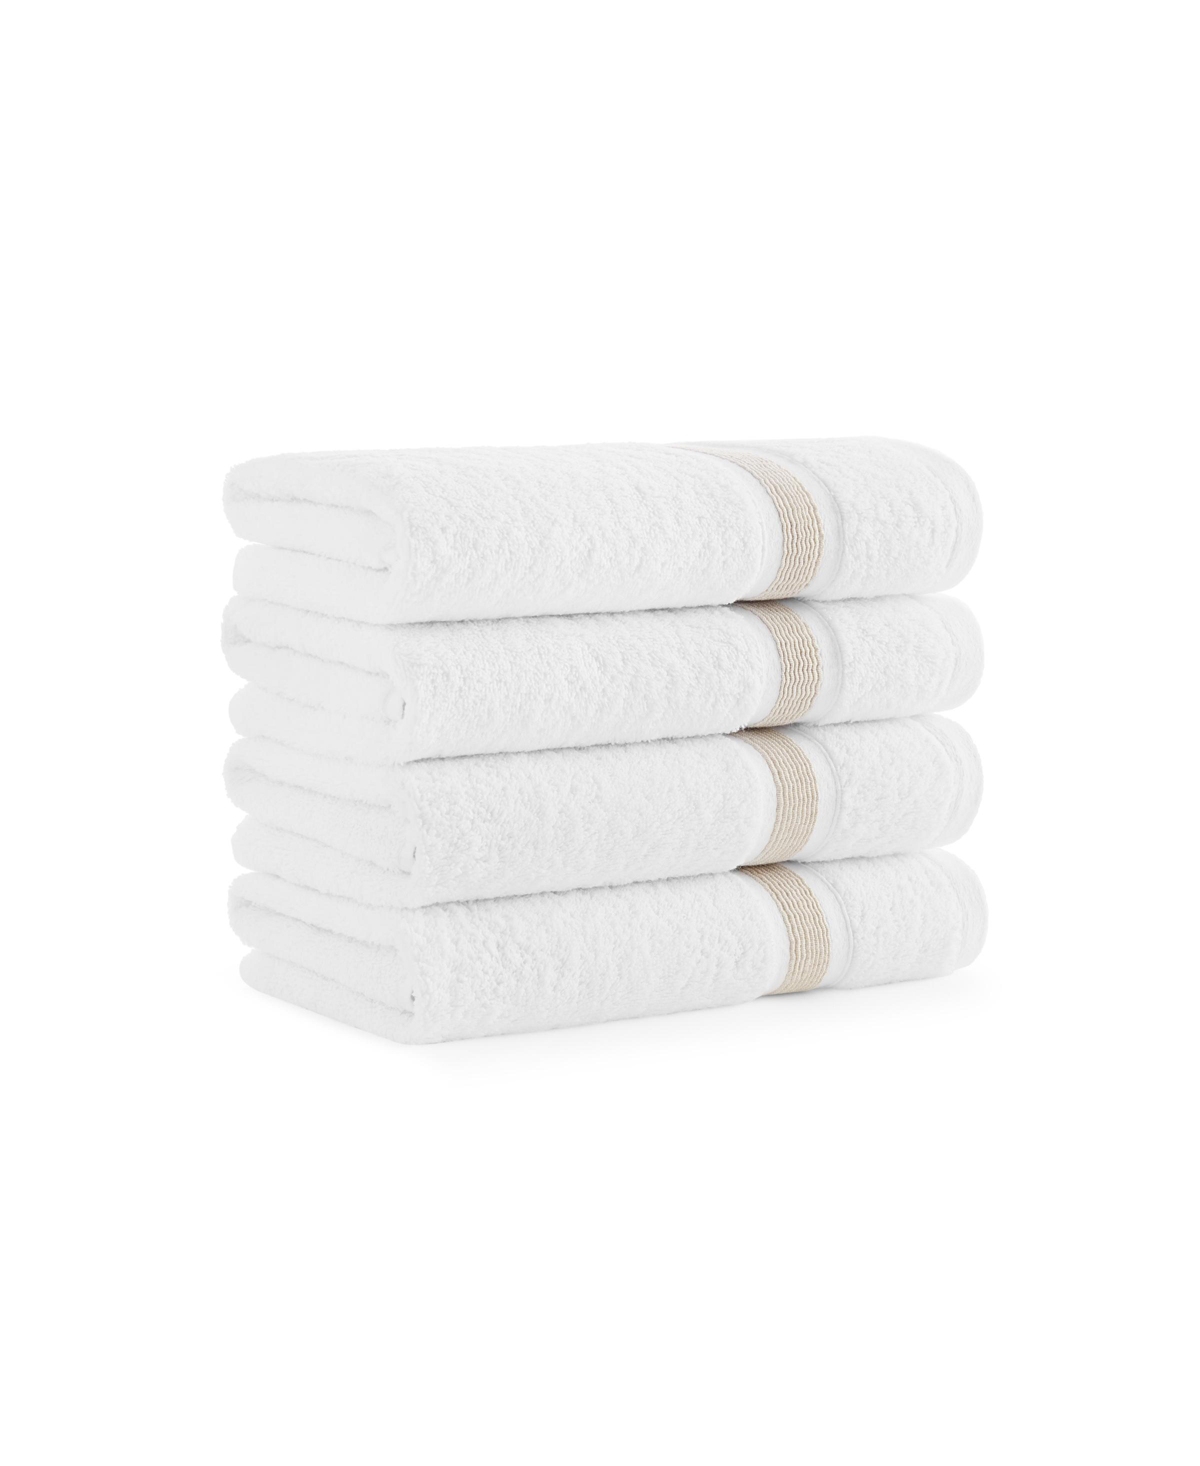 Aston And Arden Aegean Eco-friendly Recycled Turkish Hand Towels (4 Pack), 18x30, 600 Gsm, White With Weft Woven Str In Beige